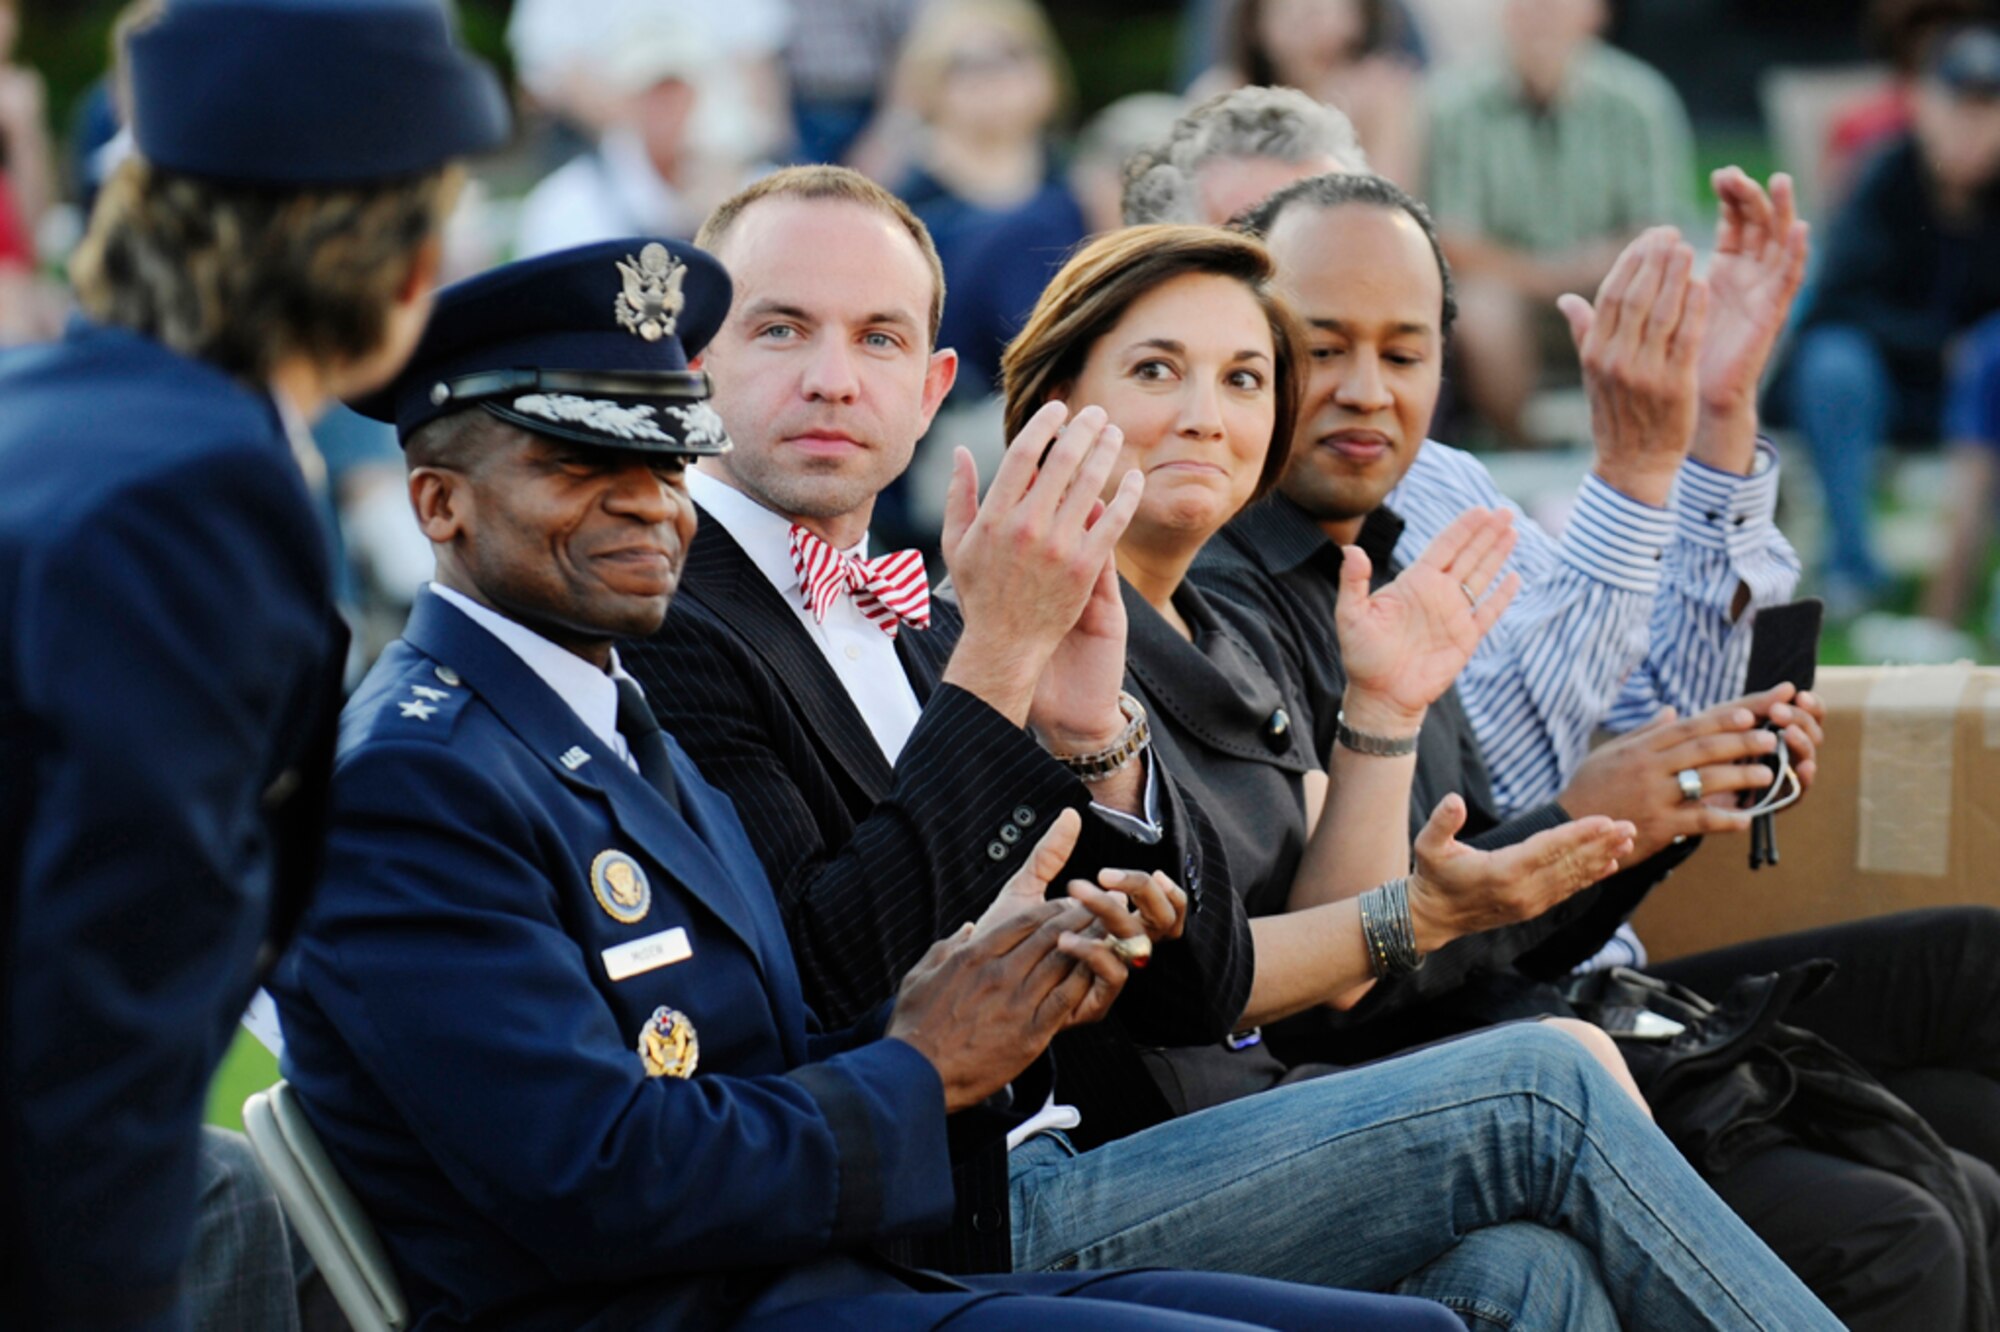 From right to left, Maj. Gen. Darren W. McDew, commander, Air Force District of Washington, Wesley Whatley, director of the band program for Macy’s Day Parade, Amy Quell, Macy Day Parade executive producer, Orland Veris, Macy’s media relations representative, and Robin Hall, senior vice president of the Macy’s Parade and entertainment group, applaud the U.S. Air Force Band’s Summer Concert Series, June 4, at The Air Force Memorial, Arlington, Va. The concert kicked off with the Macy’s Day Parade committee inviting the USAF Band and the USAF Honor Guard to participate in the 2012 Macy's Day Parade. (U.S. Air Force photo by Staff Sgt. Raymond Mills)